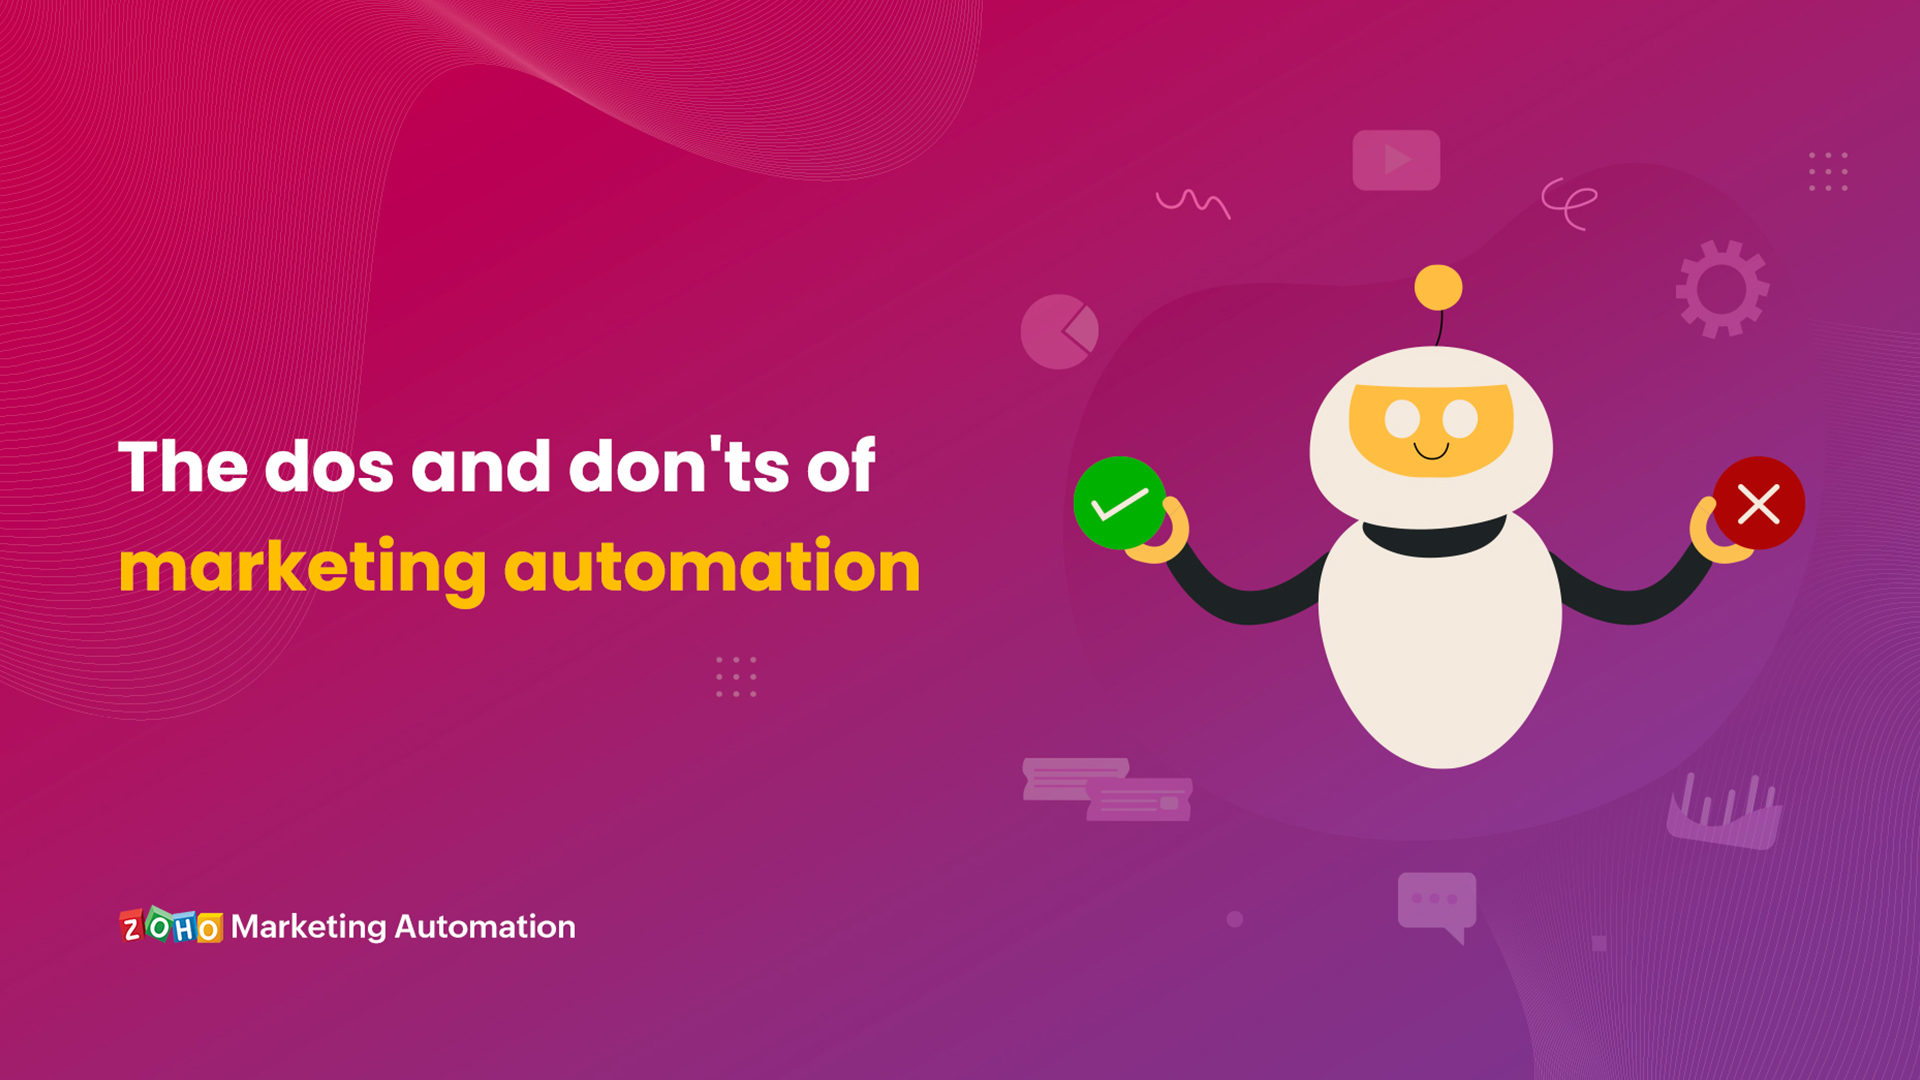 The dos and don'ts of marketing automation